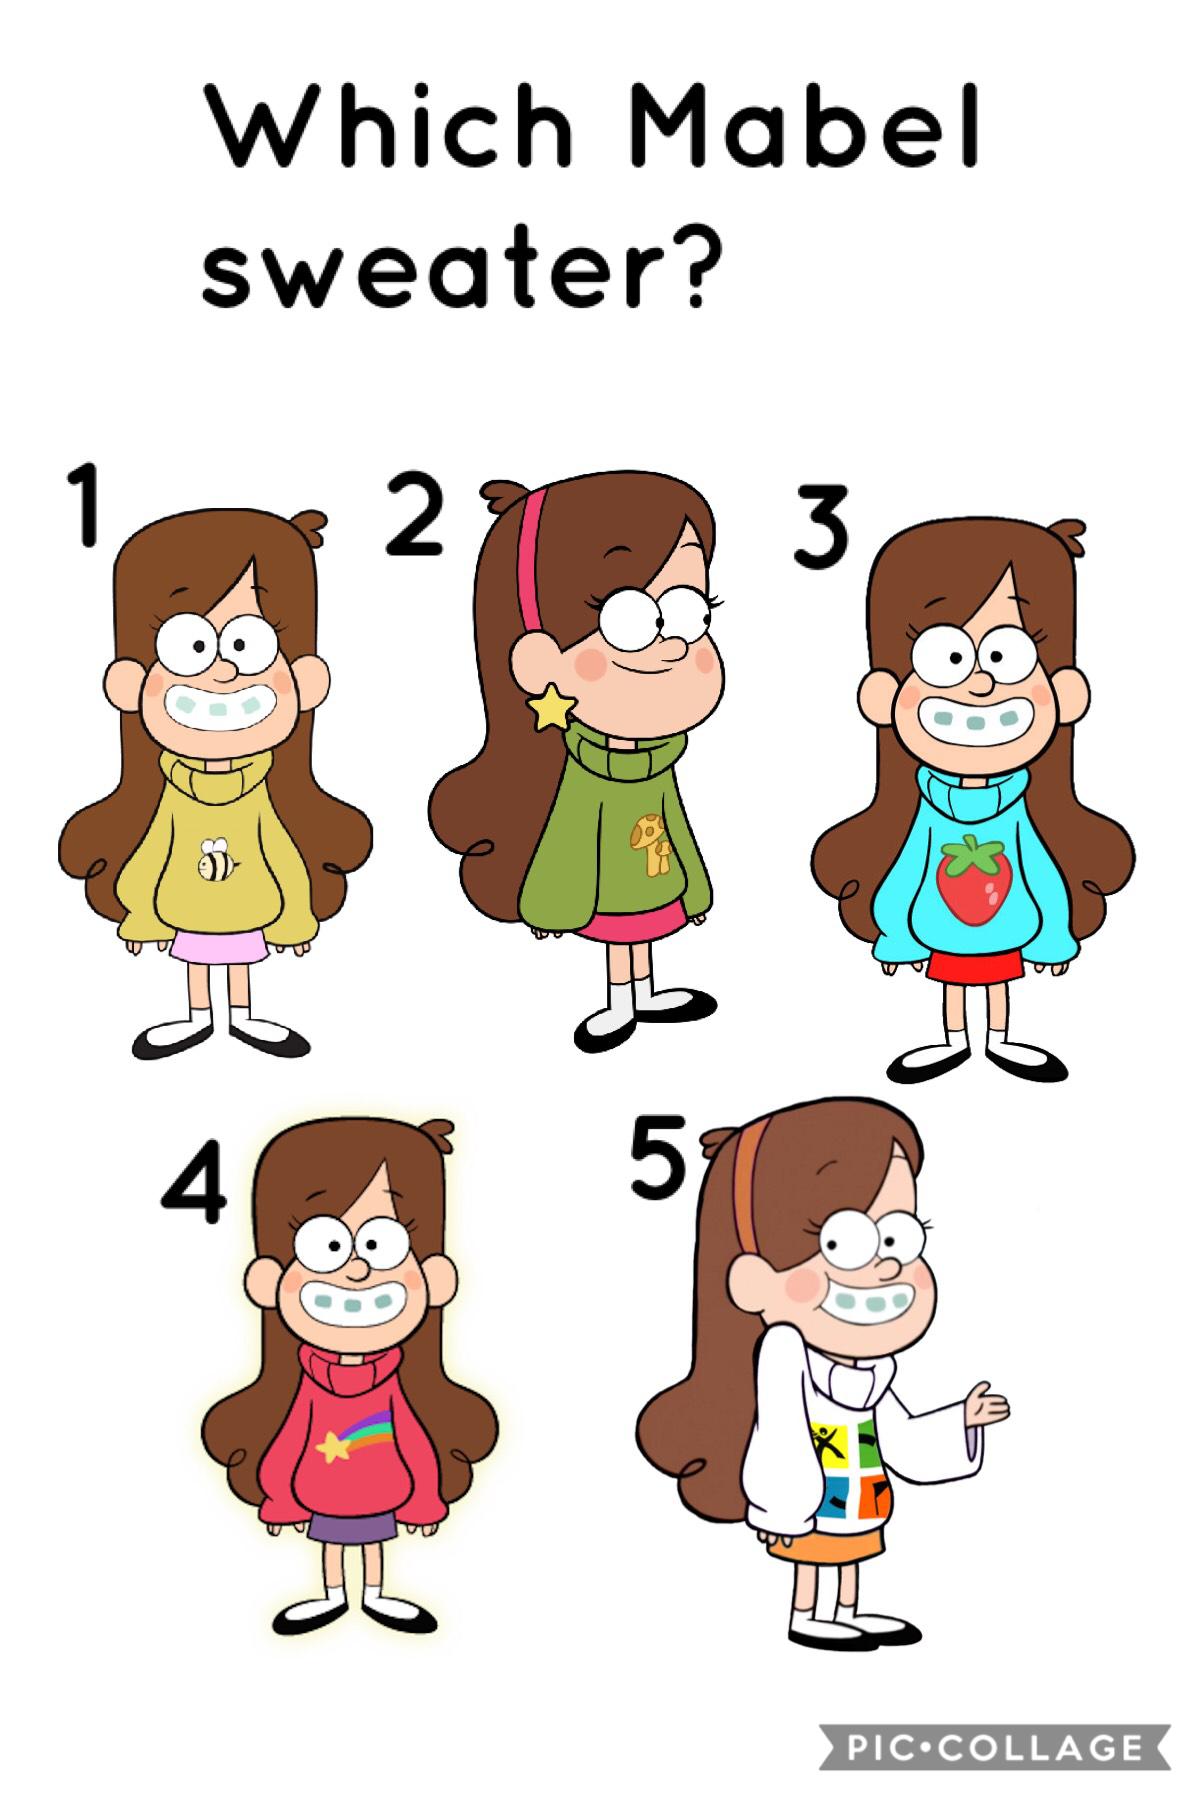 I love Mabel sweaters